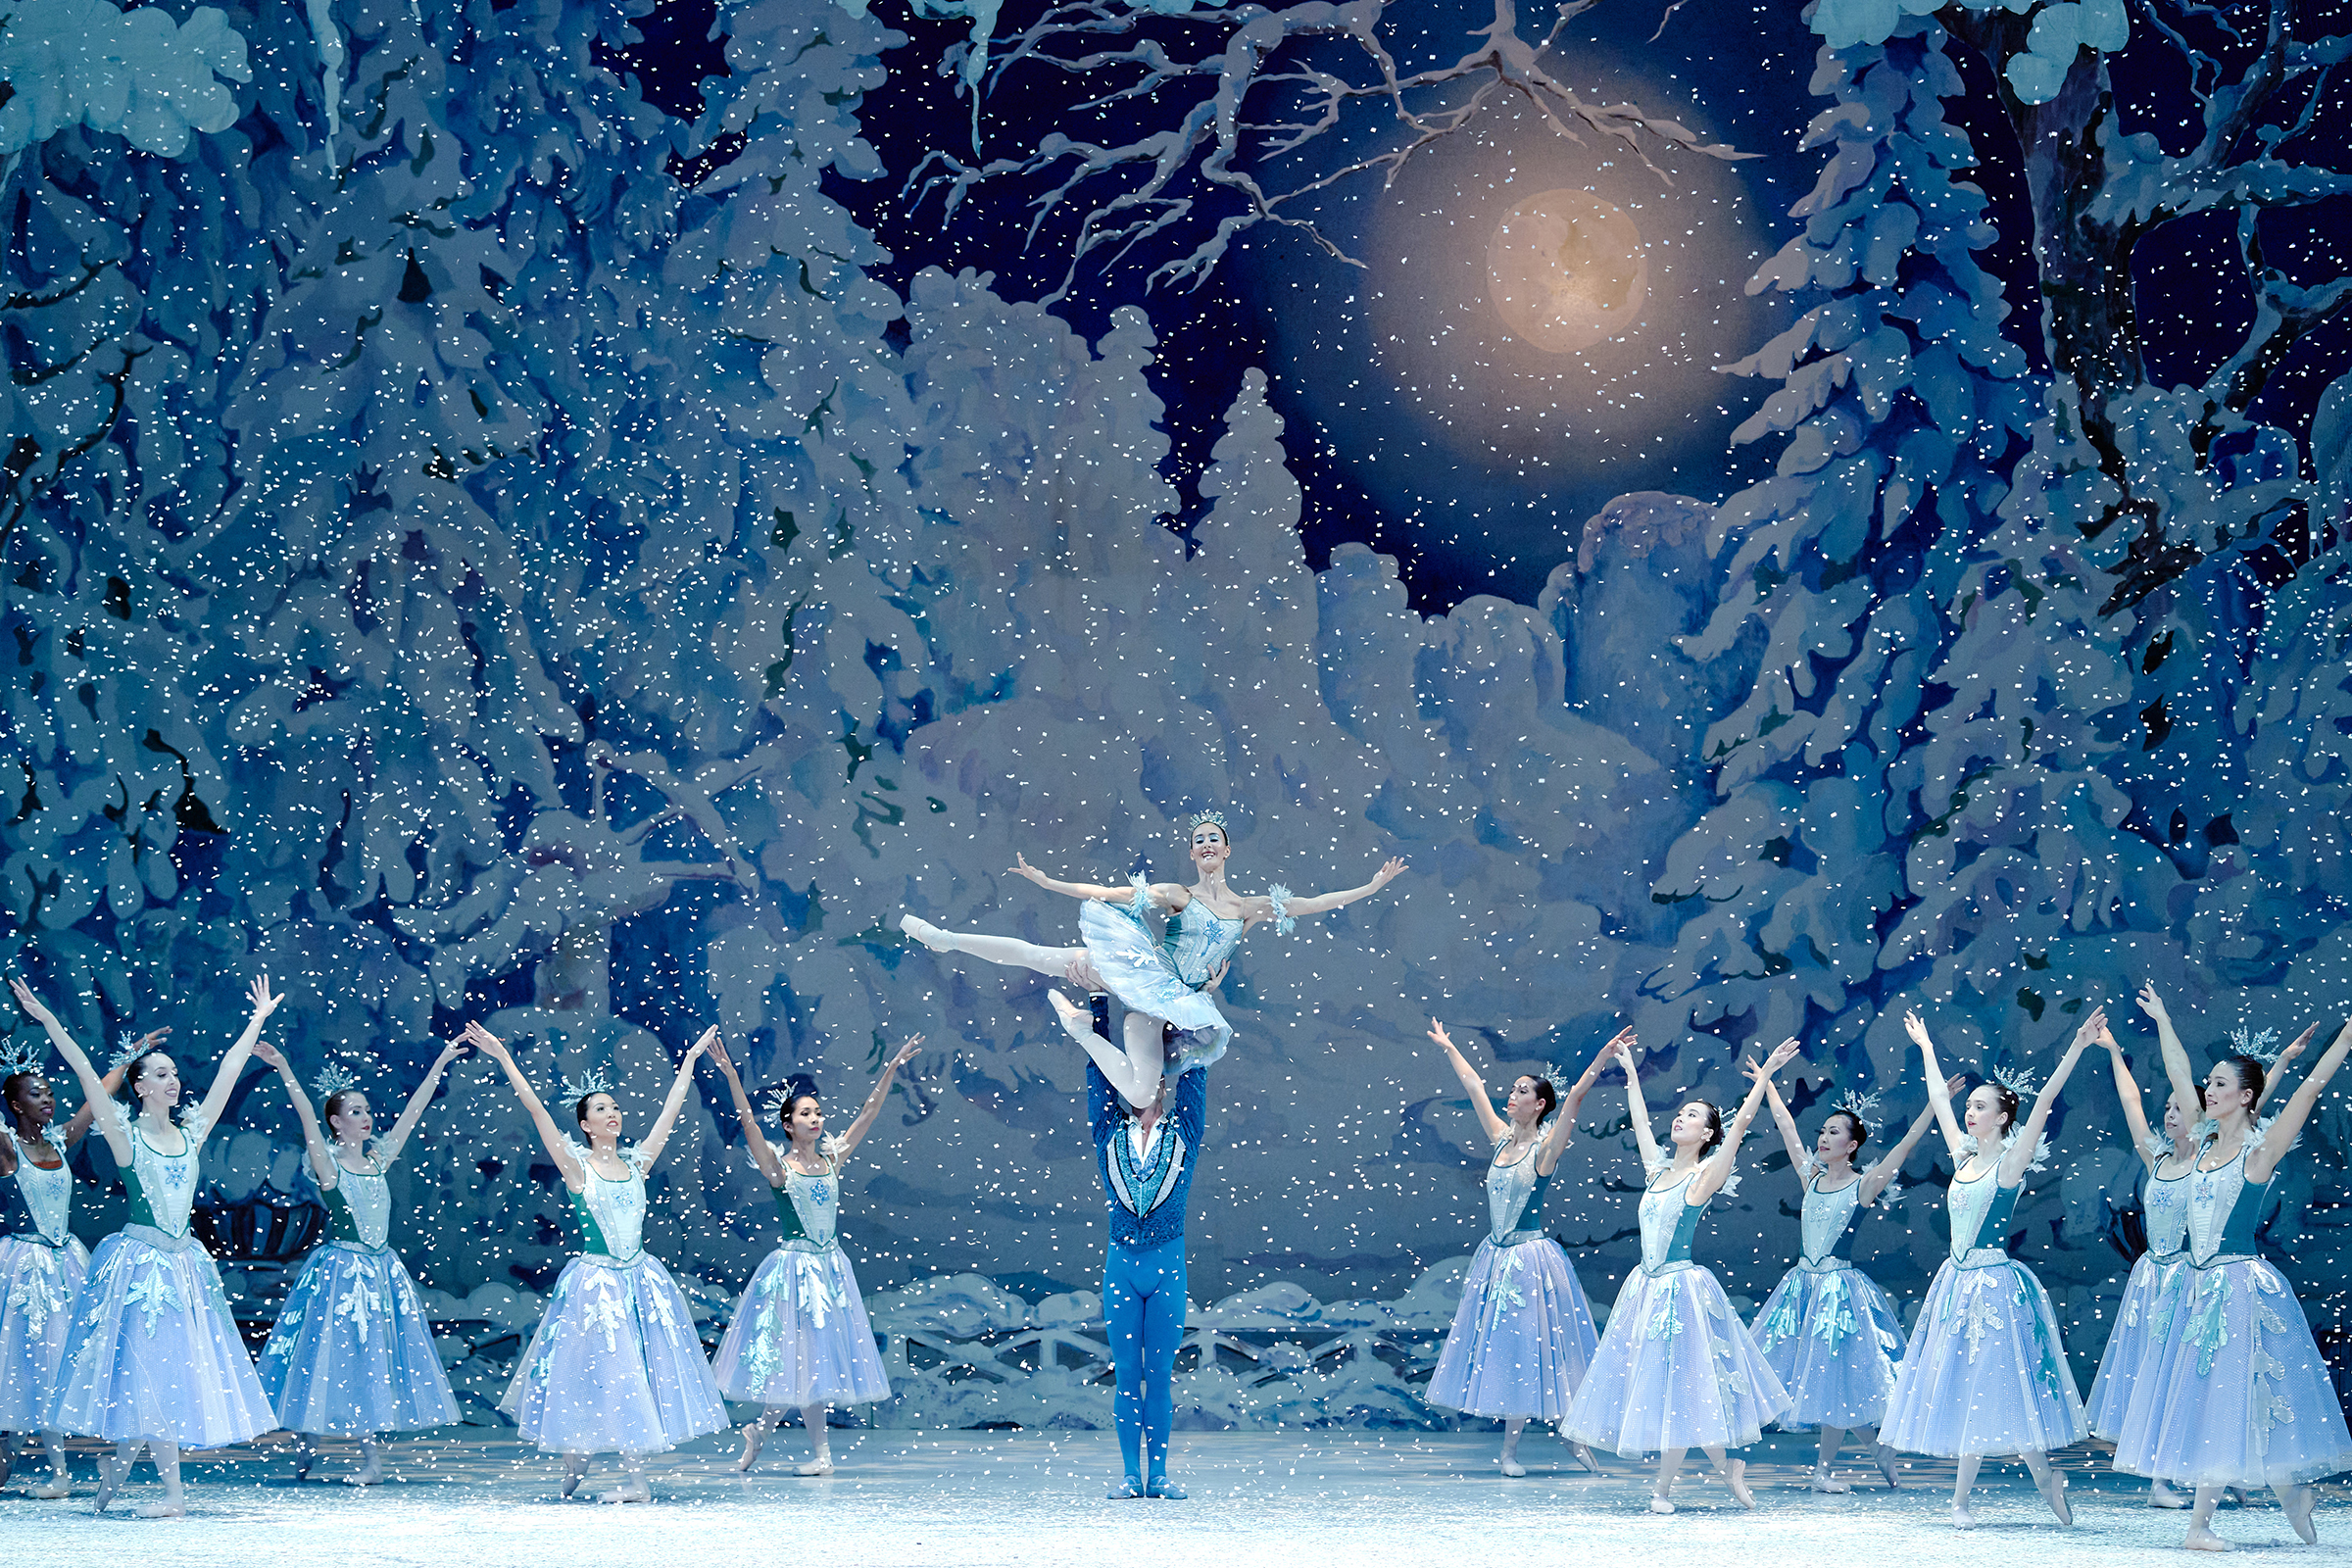 Finding the magic in the deathless Nutcracker